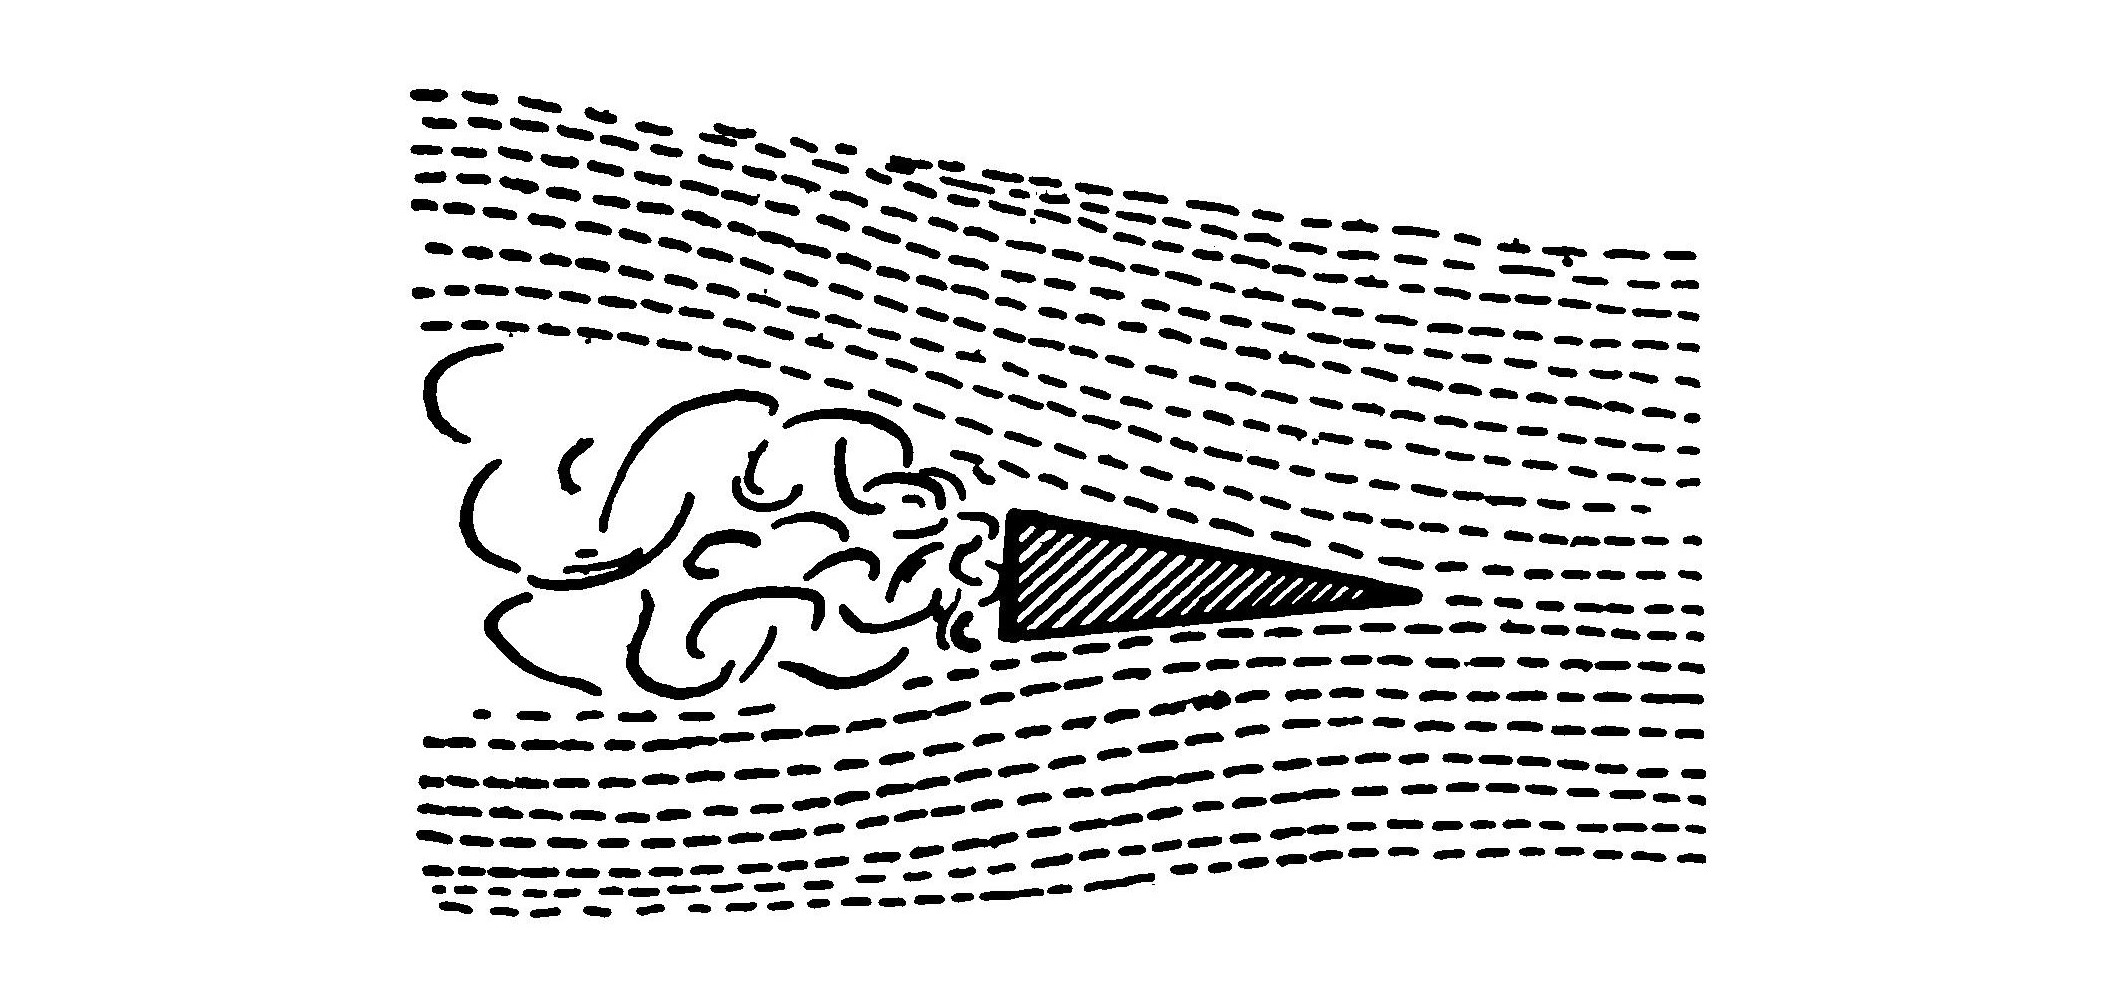 FIG. 6. The disturbance caused by a triangular body moving through the atmosphere.